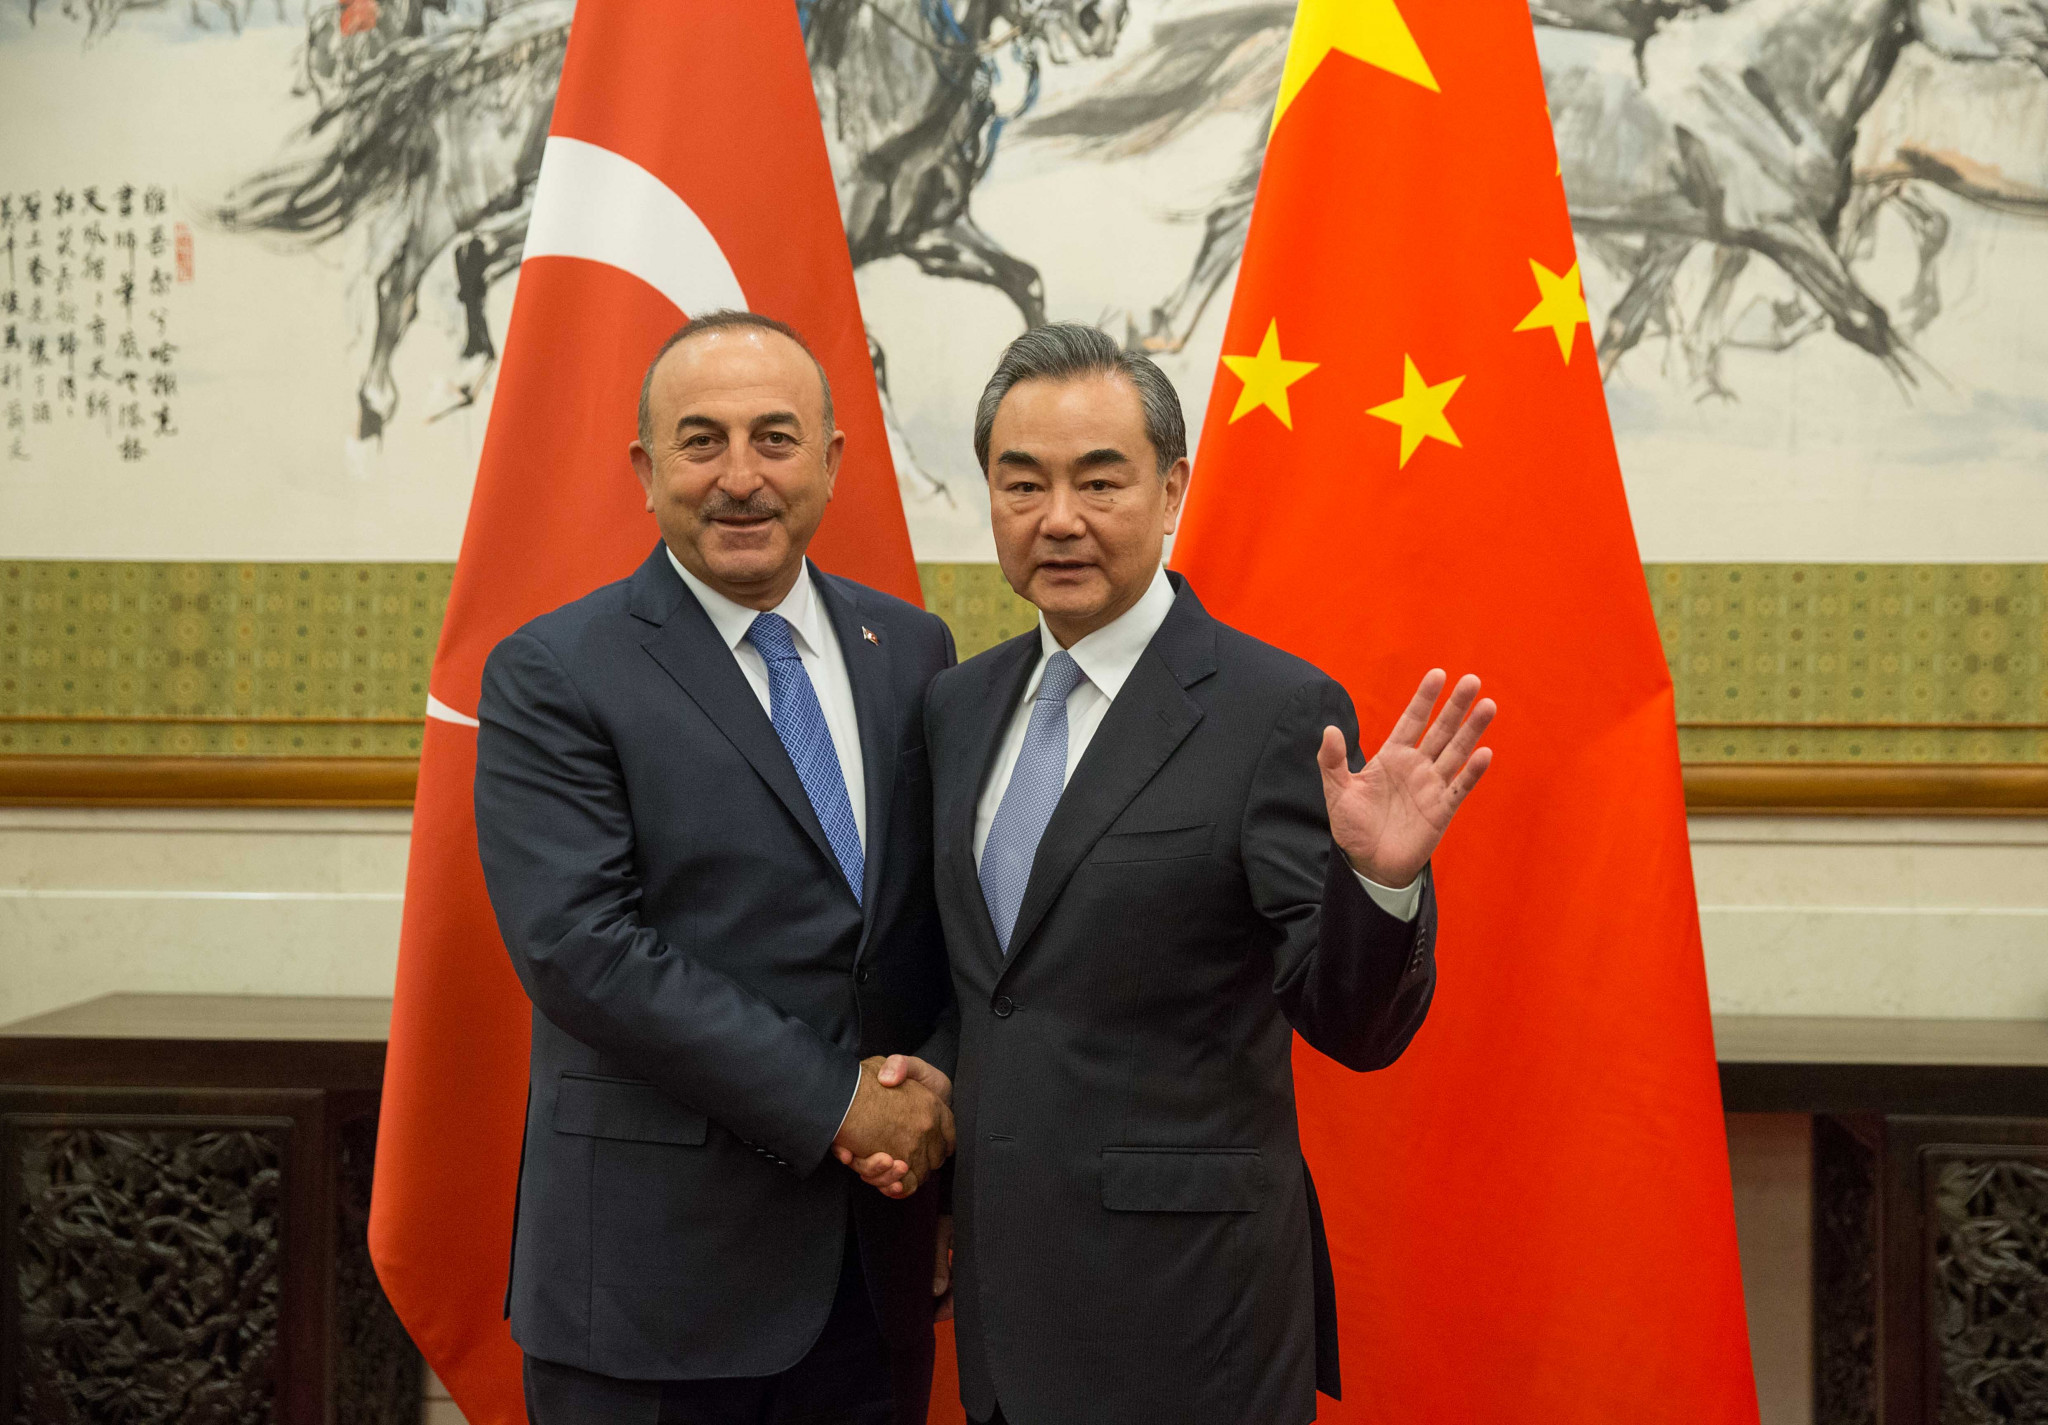 Turkey backs Beijing 2022 but Foreign Minister expresses "sensitivities" over Uyghur issues